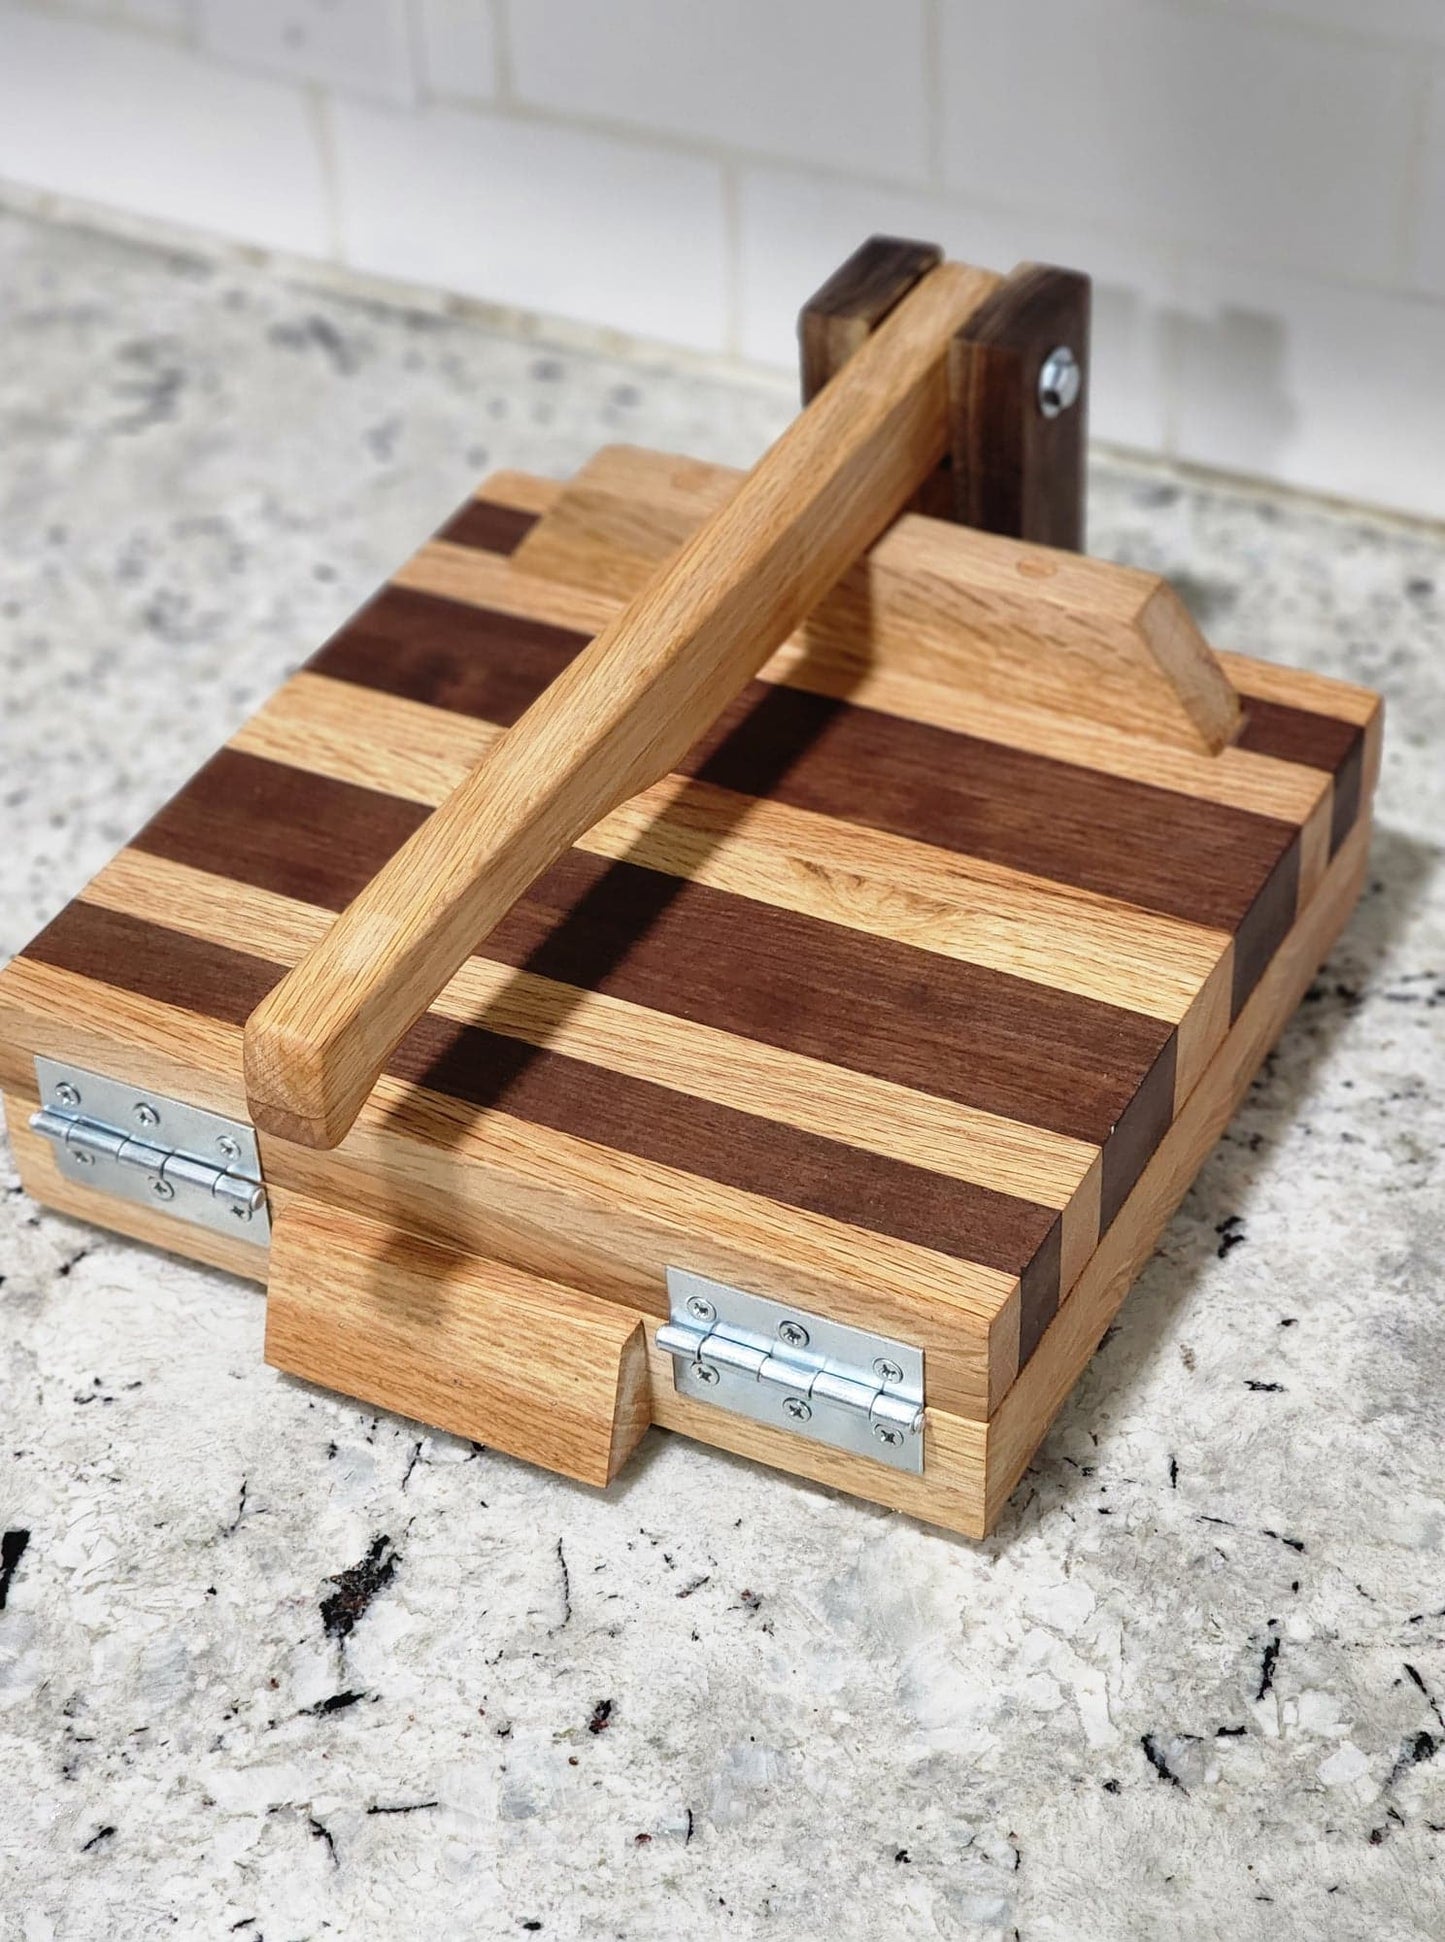 10 inch hard wood tortilla press-includes free laser engraving